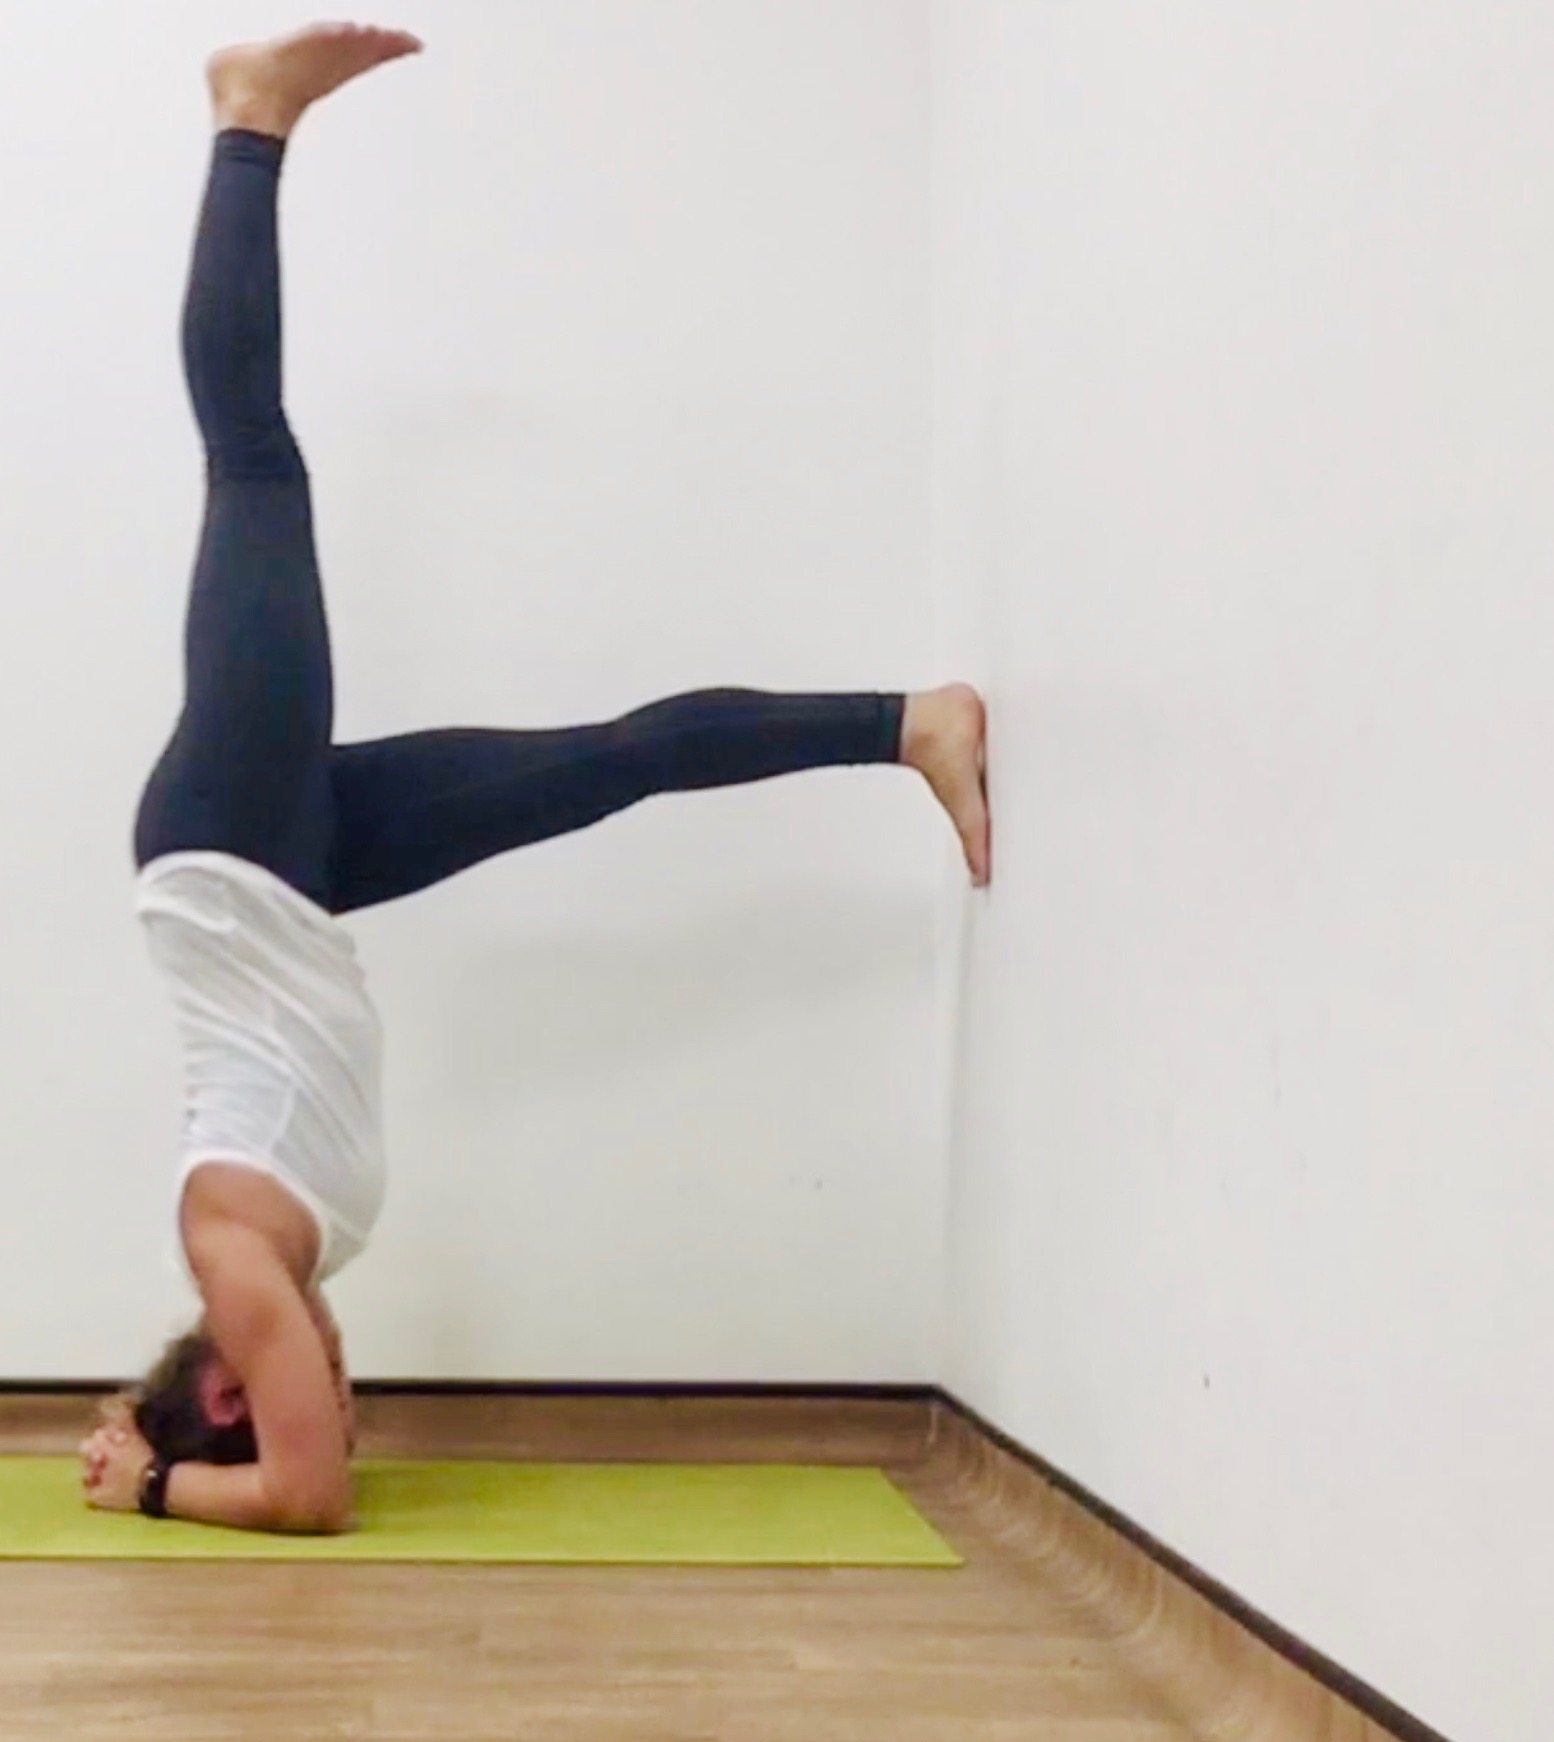 bestyoga post today! by @ania_75 . How to handstand - try these pre  exercises out to gain strength and control on your … | Yoga handstand, Yoga  postures, Handstand